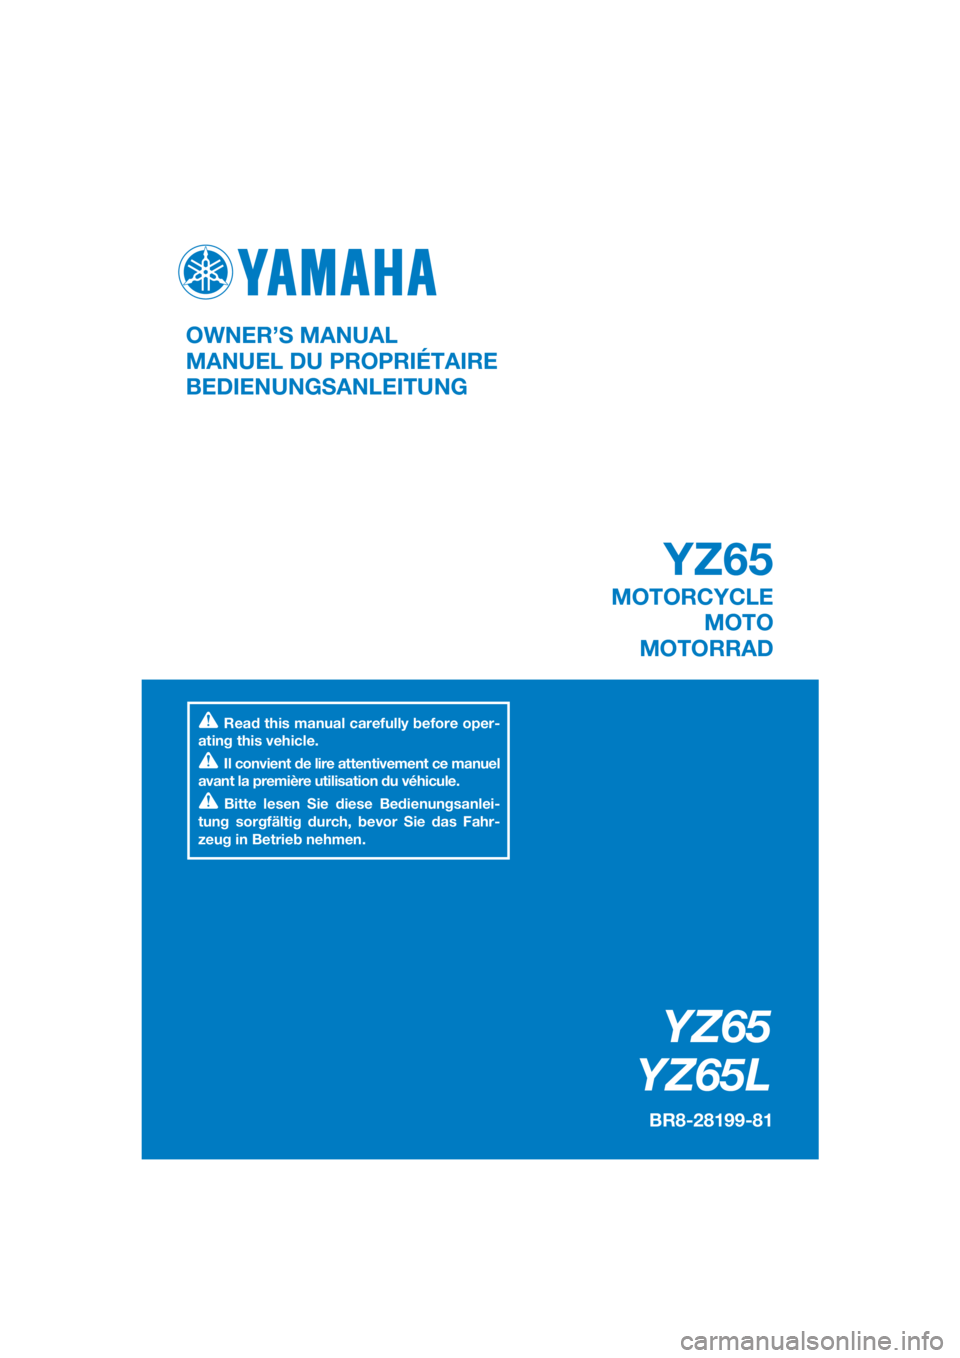 YAMAHA YZ65 2020  Notices Demploi (in French) DIC183
YZ65
YZ65L
BR8-28199-81
OWNER’S MANUAL
MANUEL DU PROPRIÉTAIRE
BEDIENUNGSANLEITUNG
Read this manual carefully before oper-
ating this vehicle.
Il convient de lire attentivement ce manuel 
ava